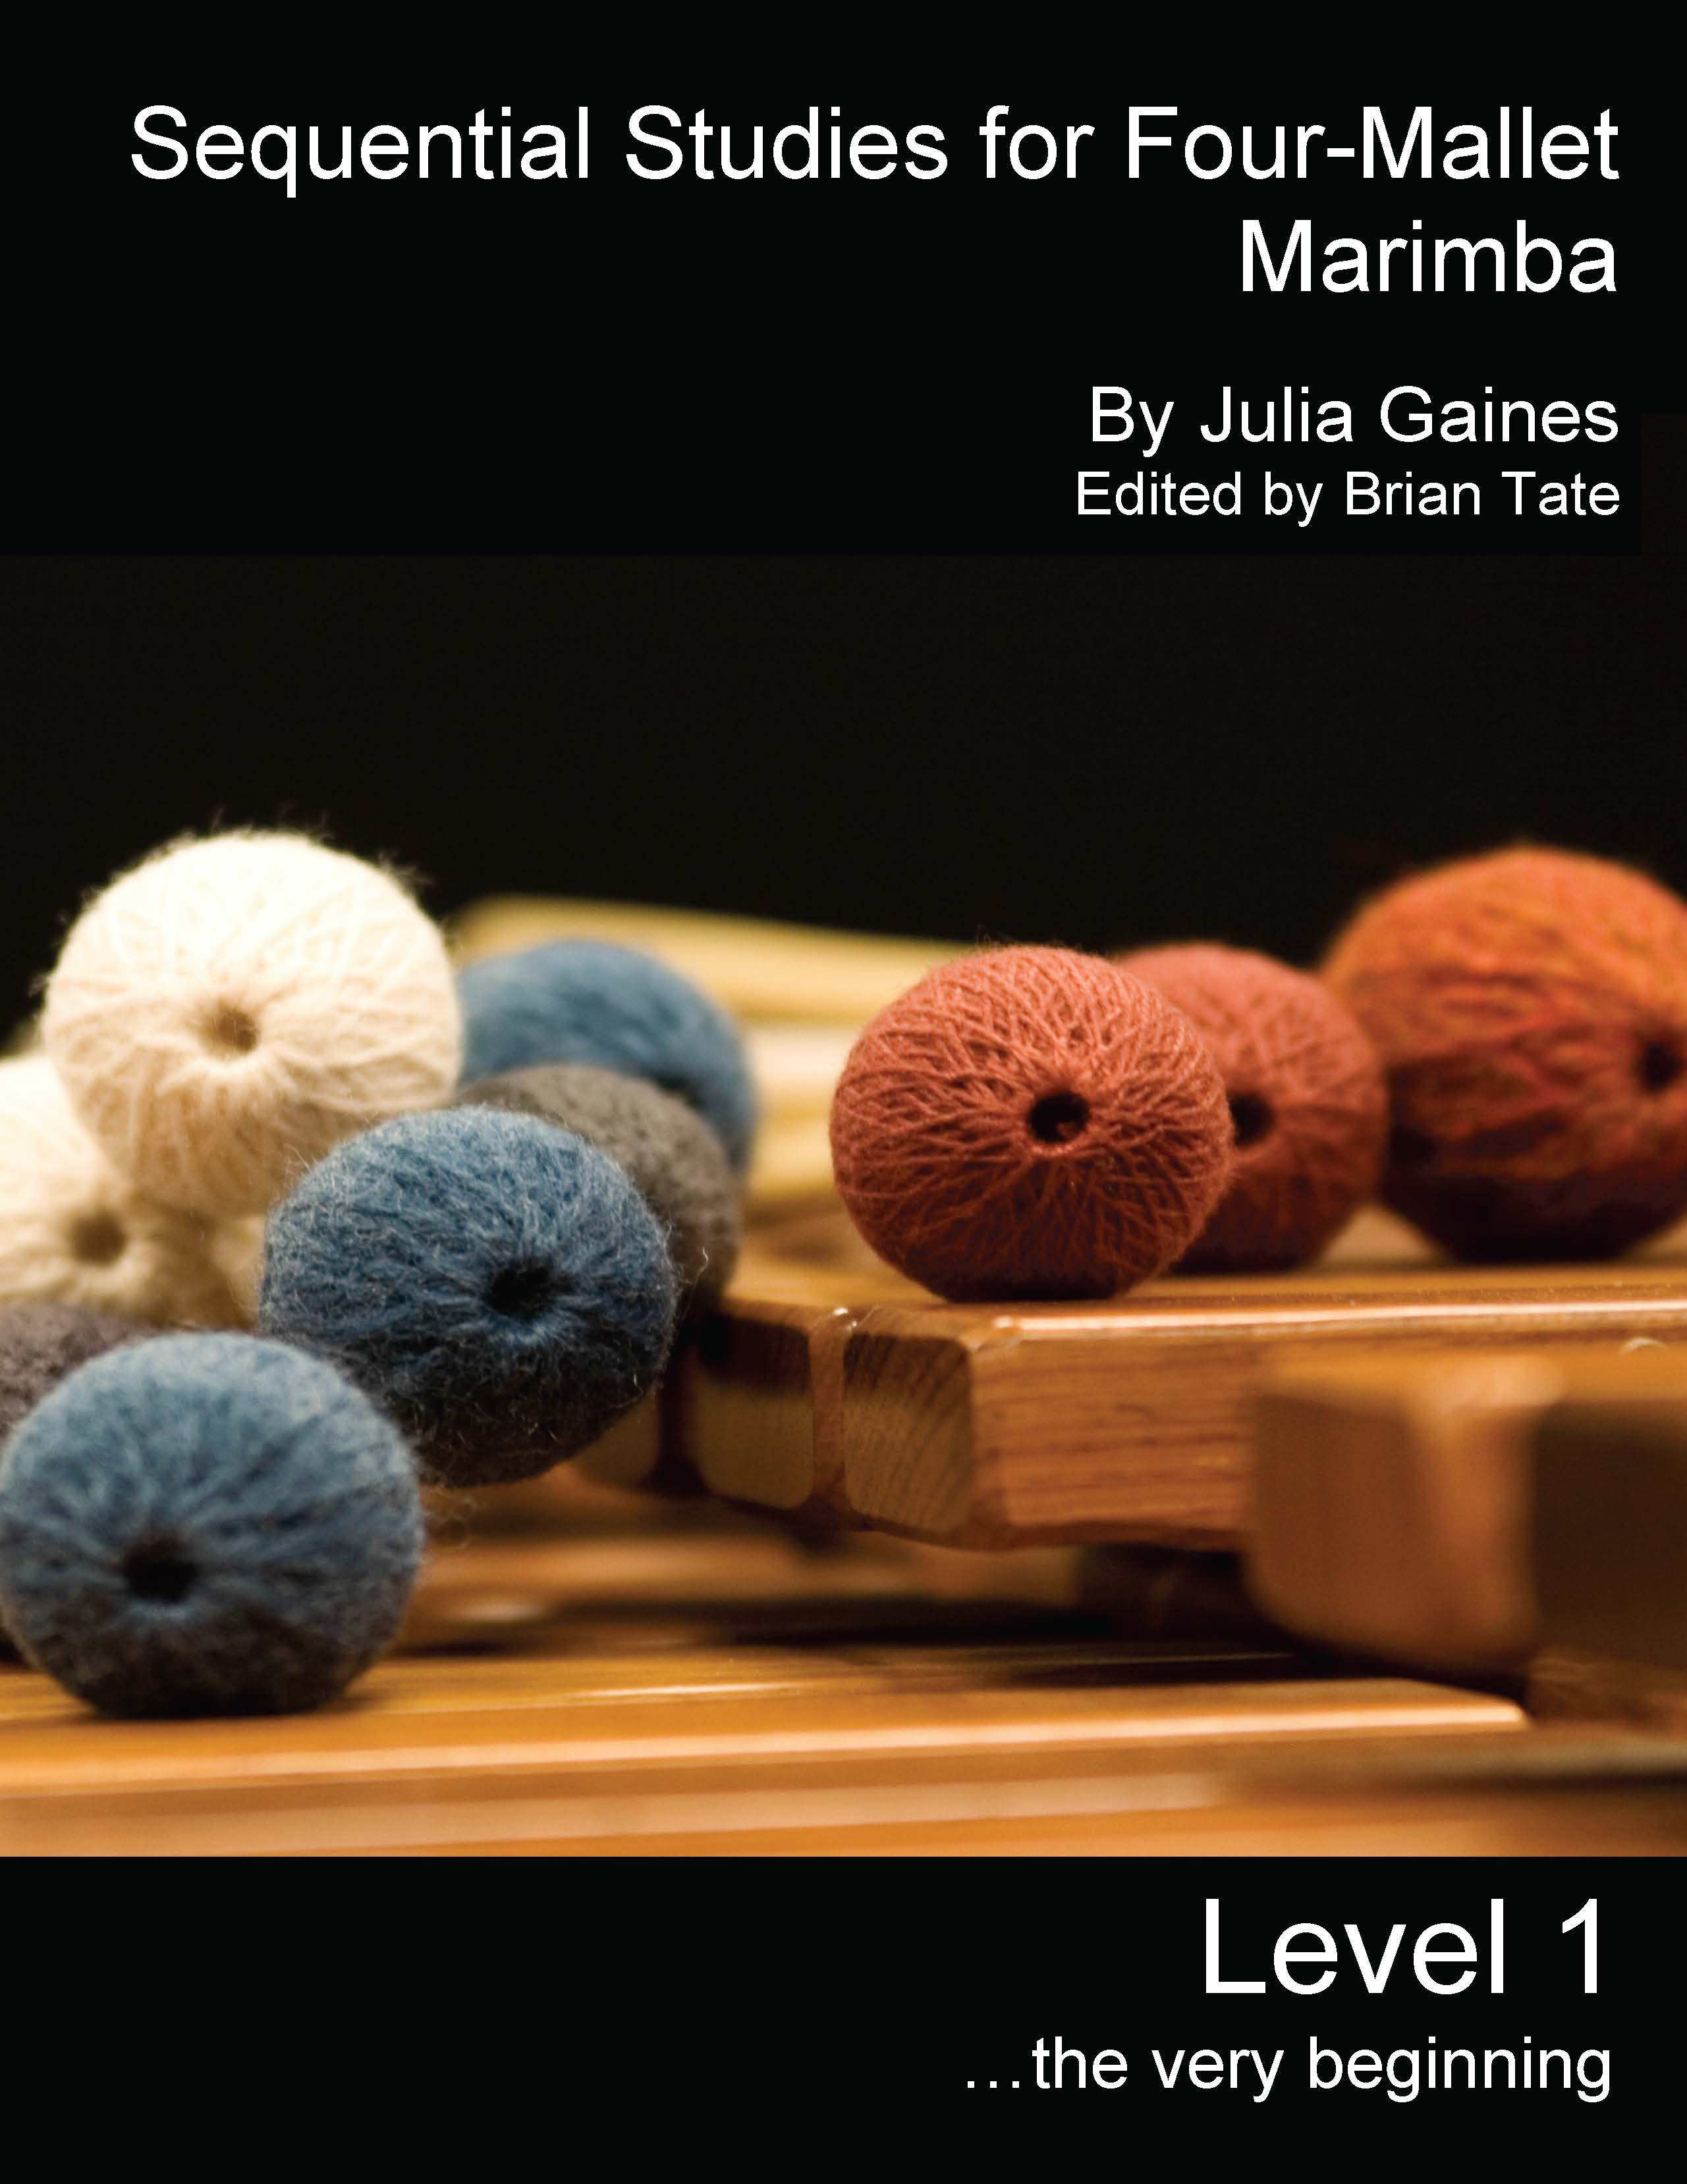 Sequential Studies for Four-Mallet Marimba: Level 1